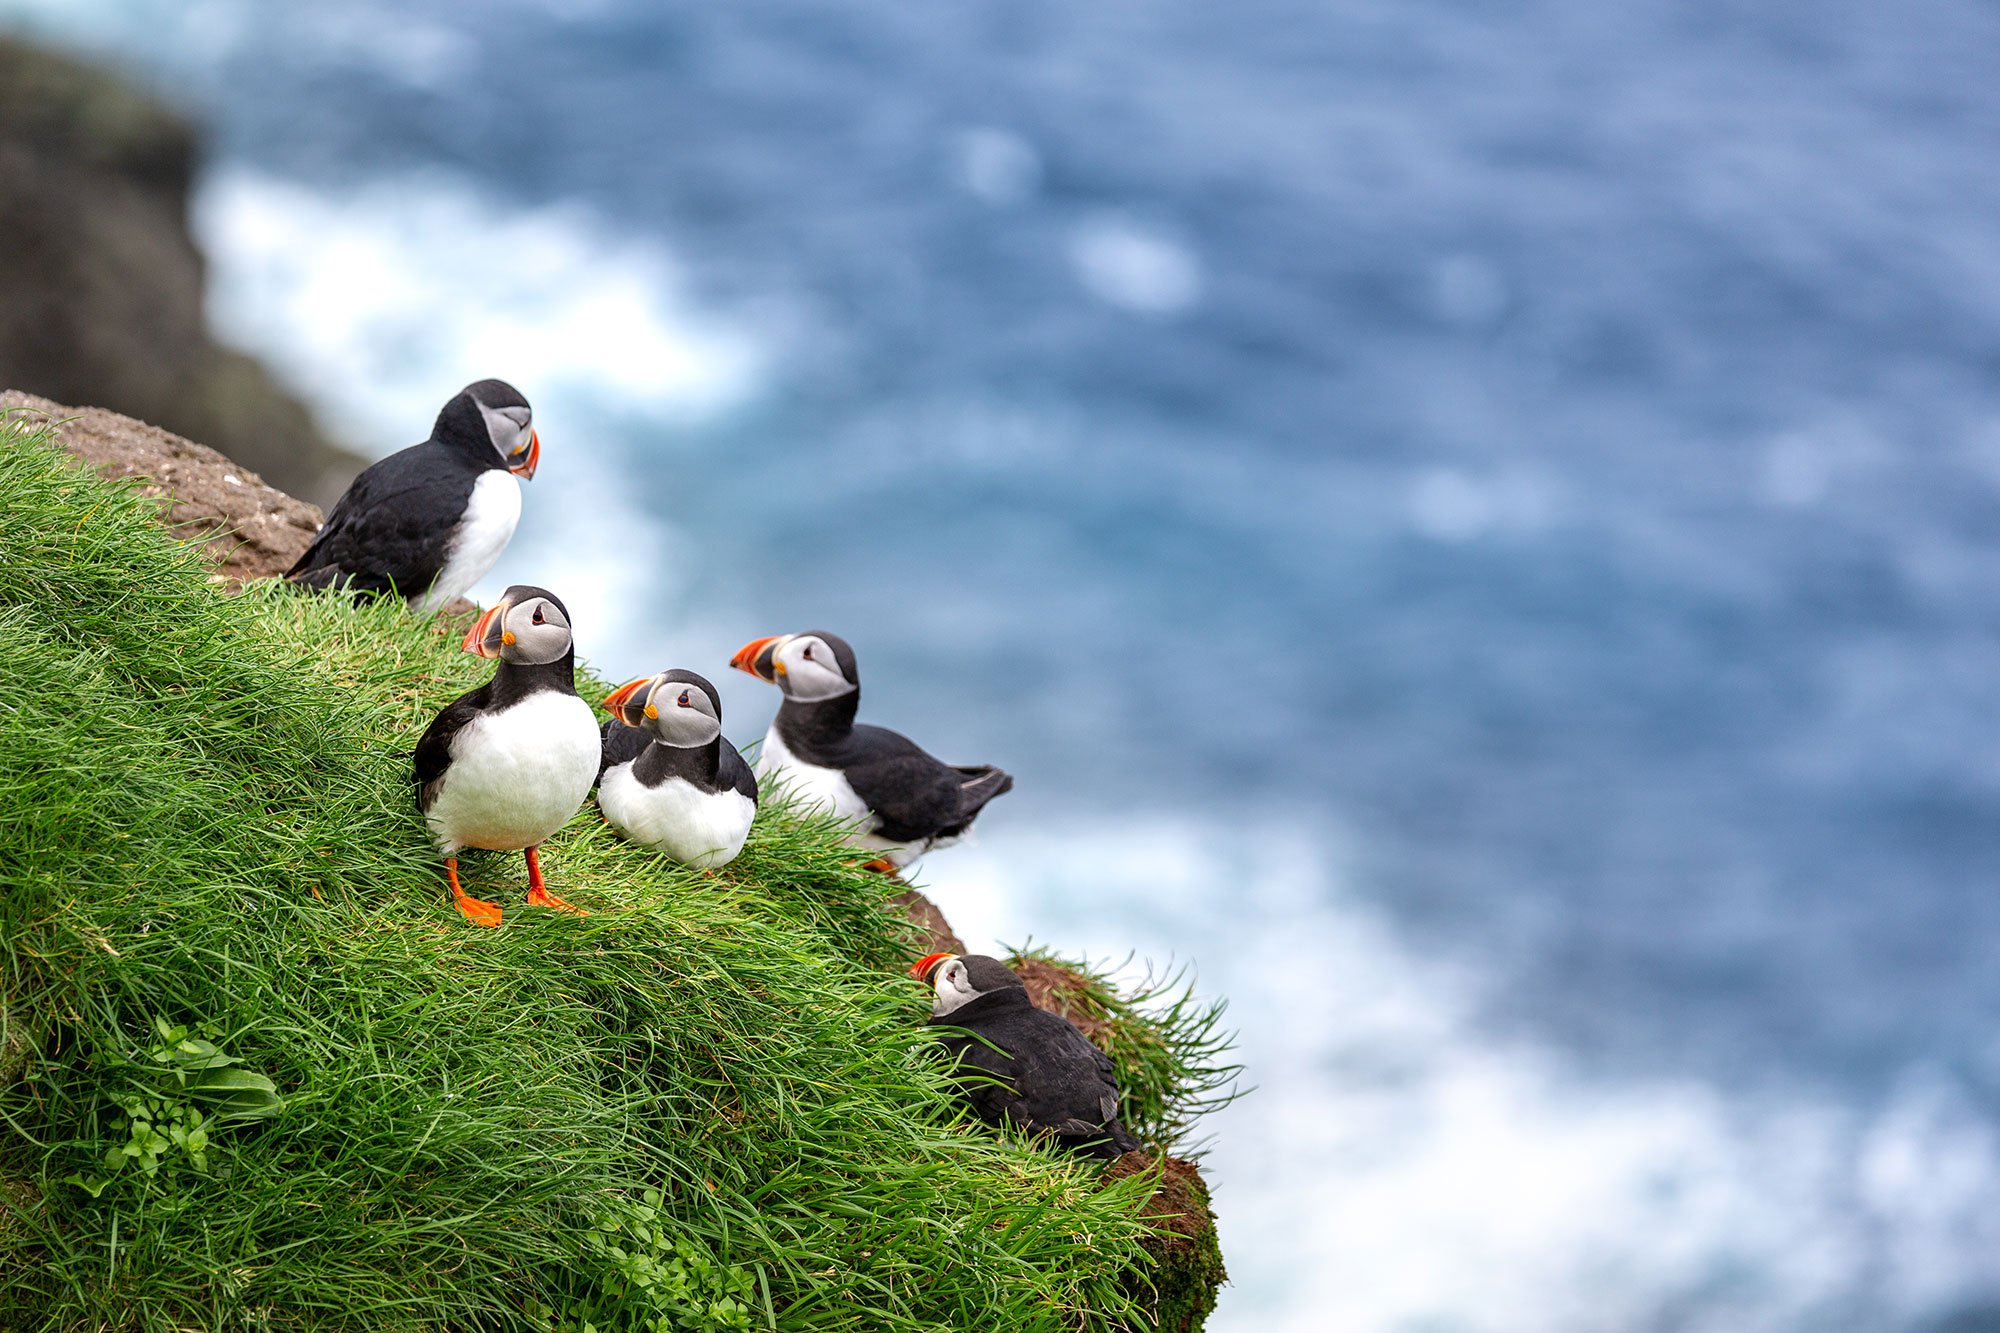 A family of Penguins on a grassy clip.